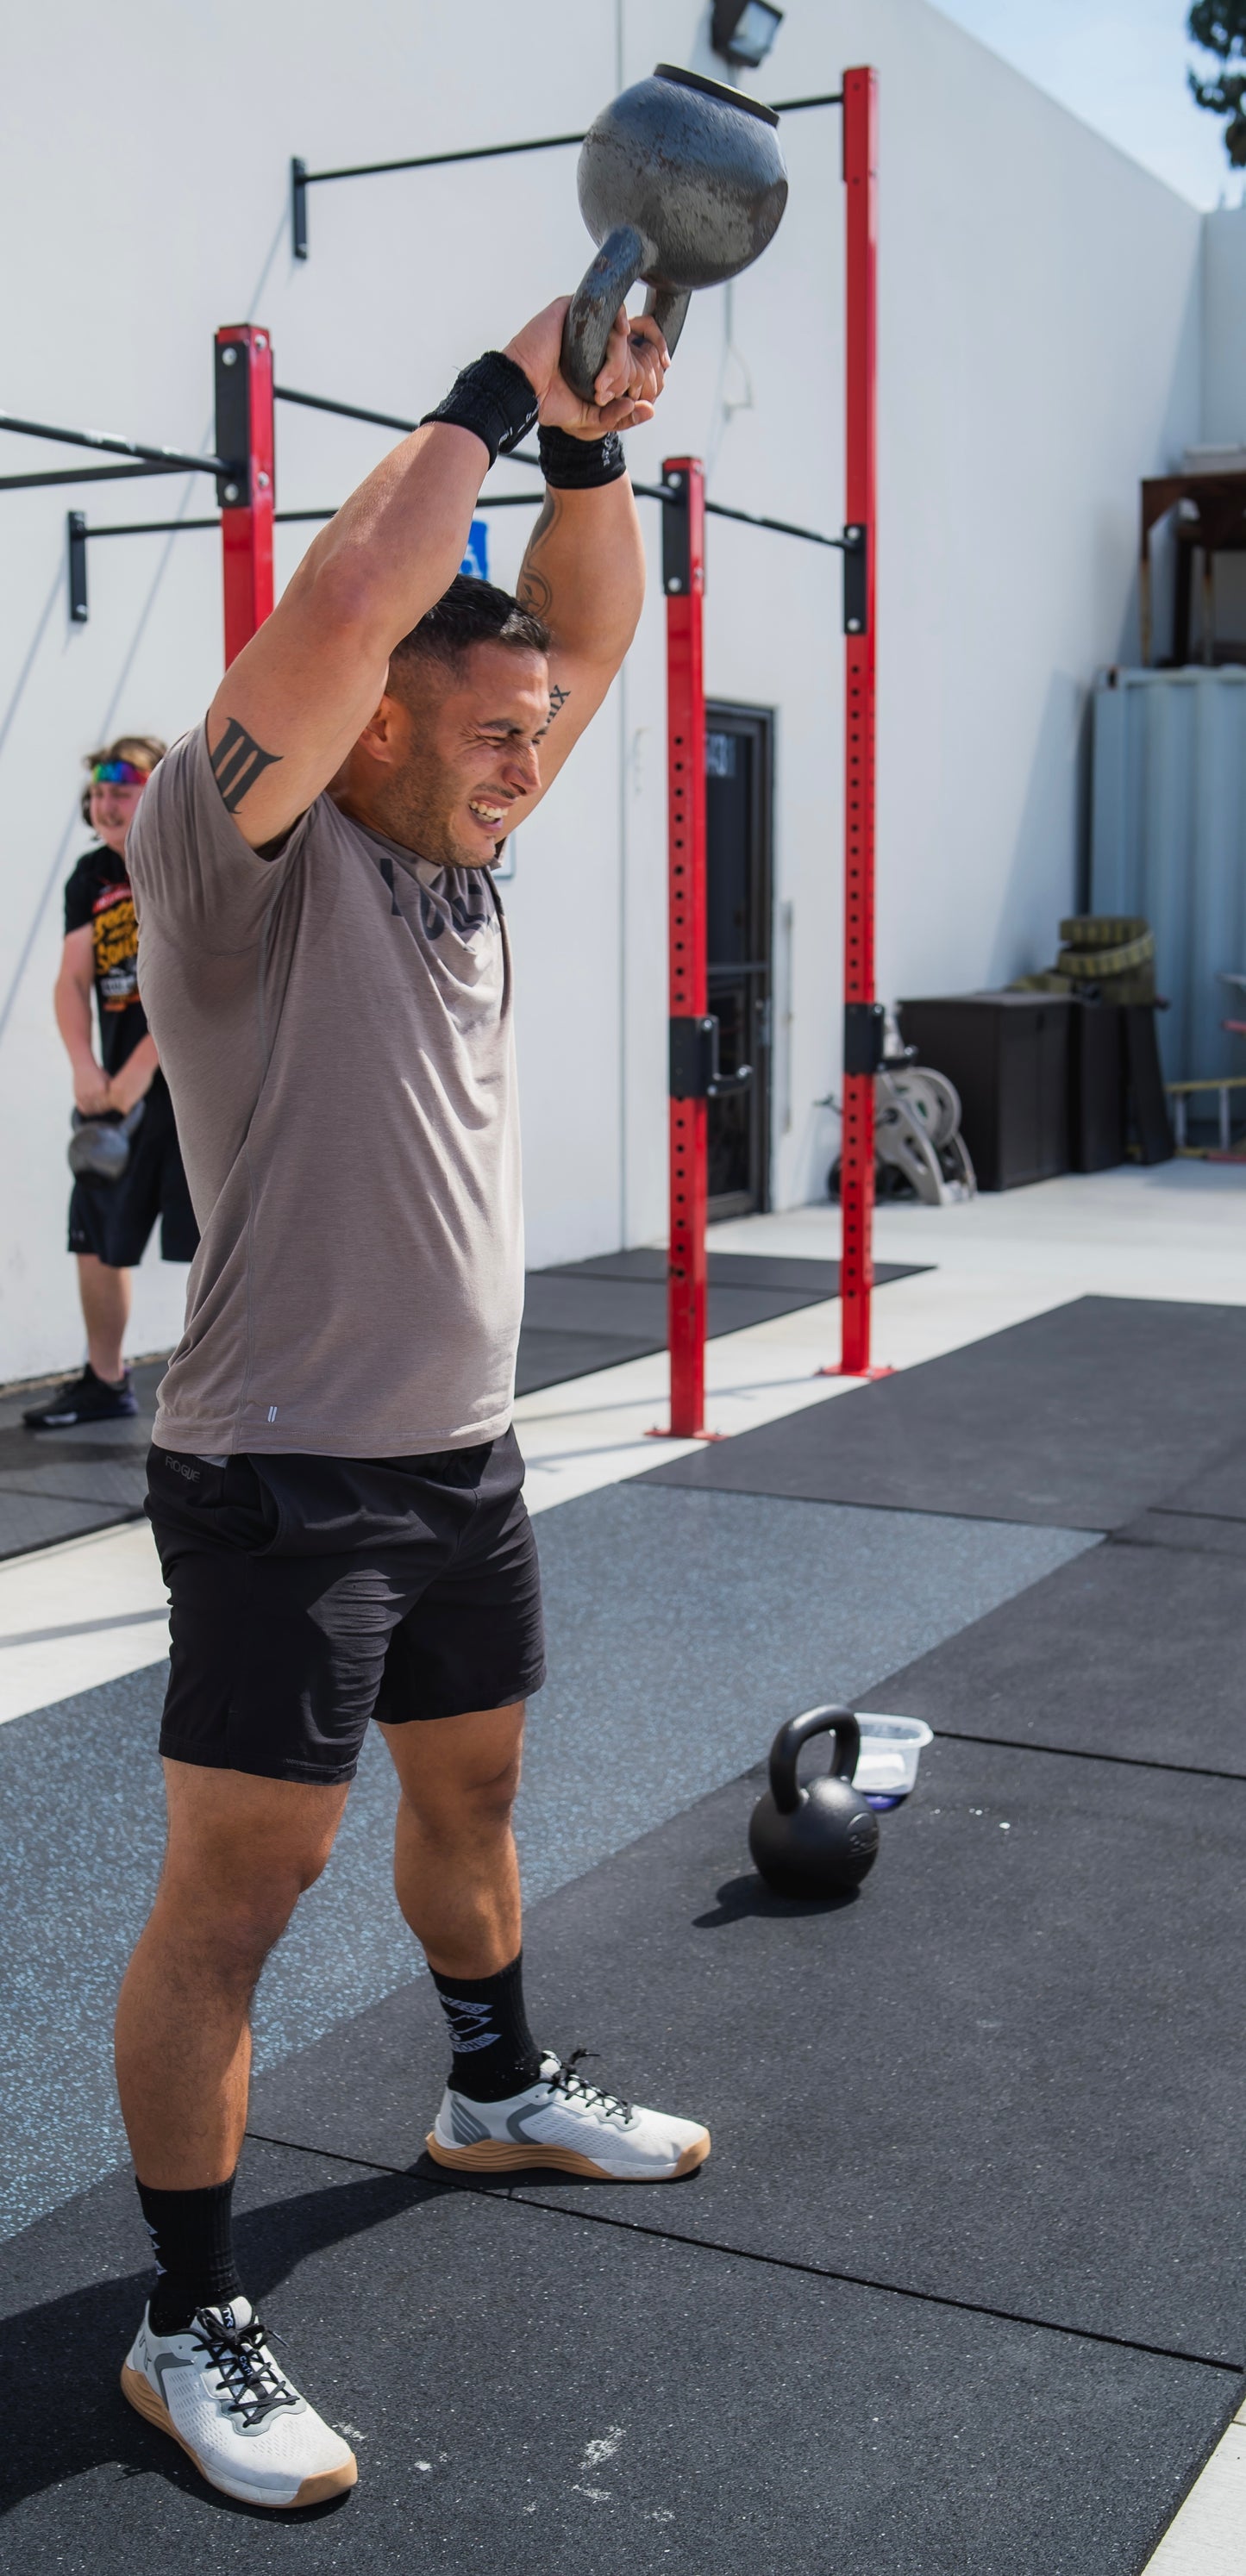 Functional Fitness 101: EVERYTHING YOU NEED TO KNOW